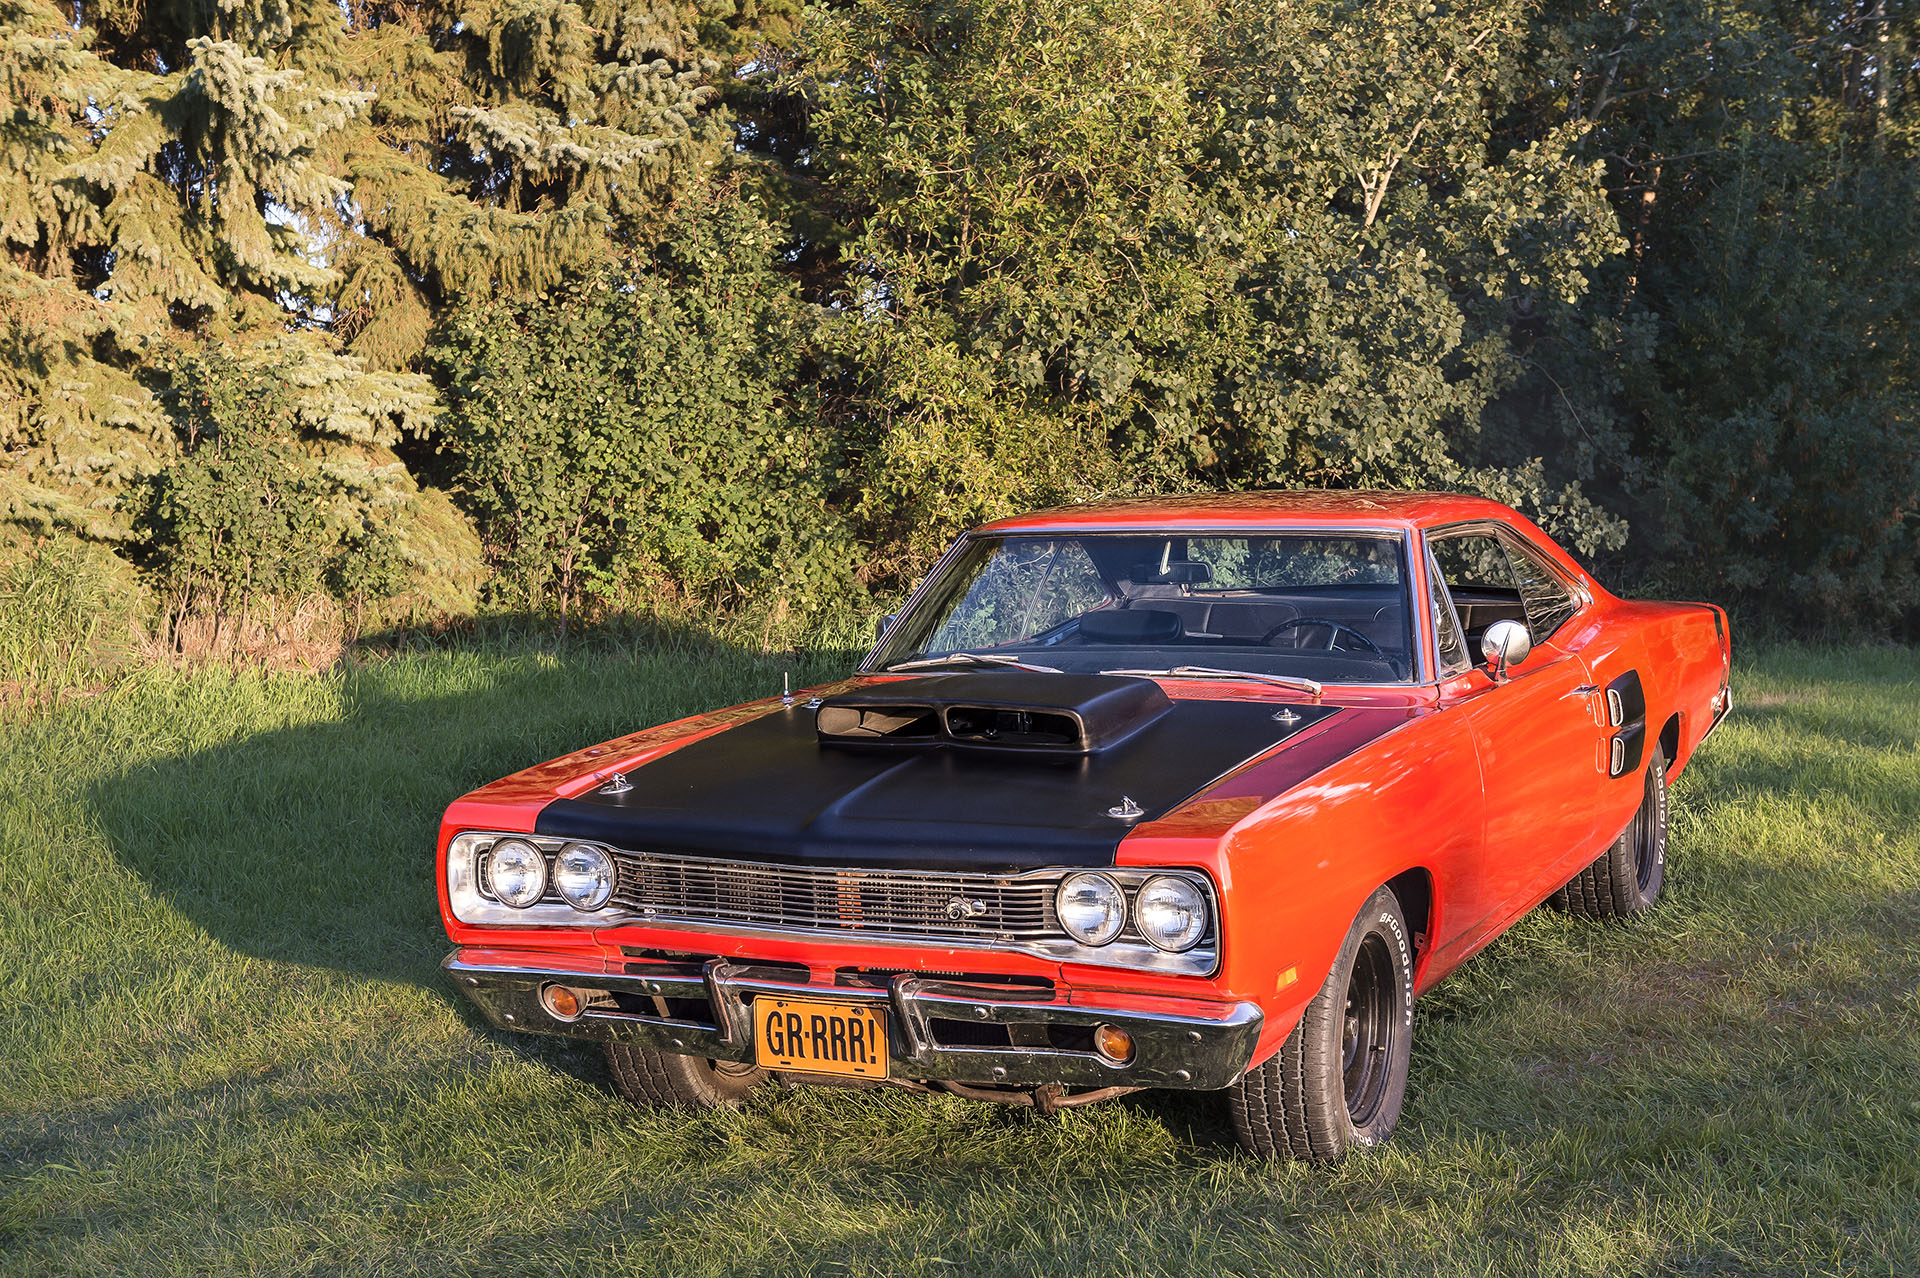    
  
  
&nbsp;  
&nbsp;  
&nbsp;  
&nbsp;  
&nbsp;  
&nbsp;  
&nbsp;  
&nbsp;  
&nbsp;  
&nbsp;  
&nbsp;  
&nbsp;  
  
  
  
  
  
   1969 Dodge Super Bee   383 Engine with a 727 automatic transmission and a 8-3/4” Rear Diff.&nbsp; This car is loca